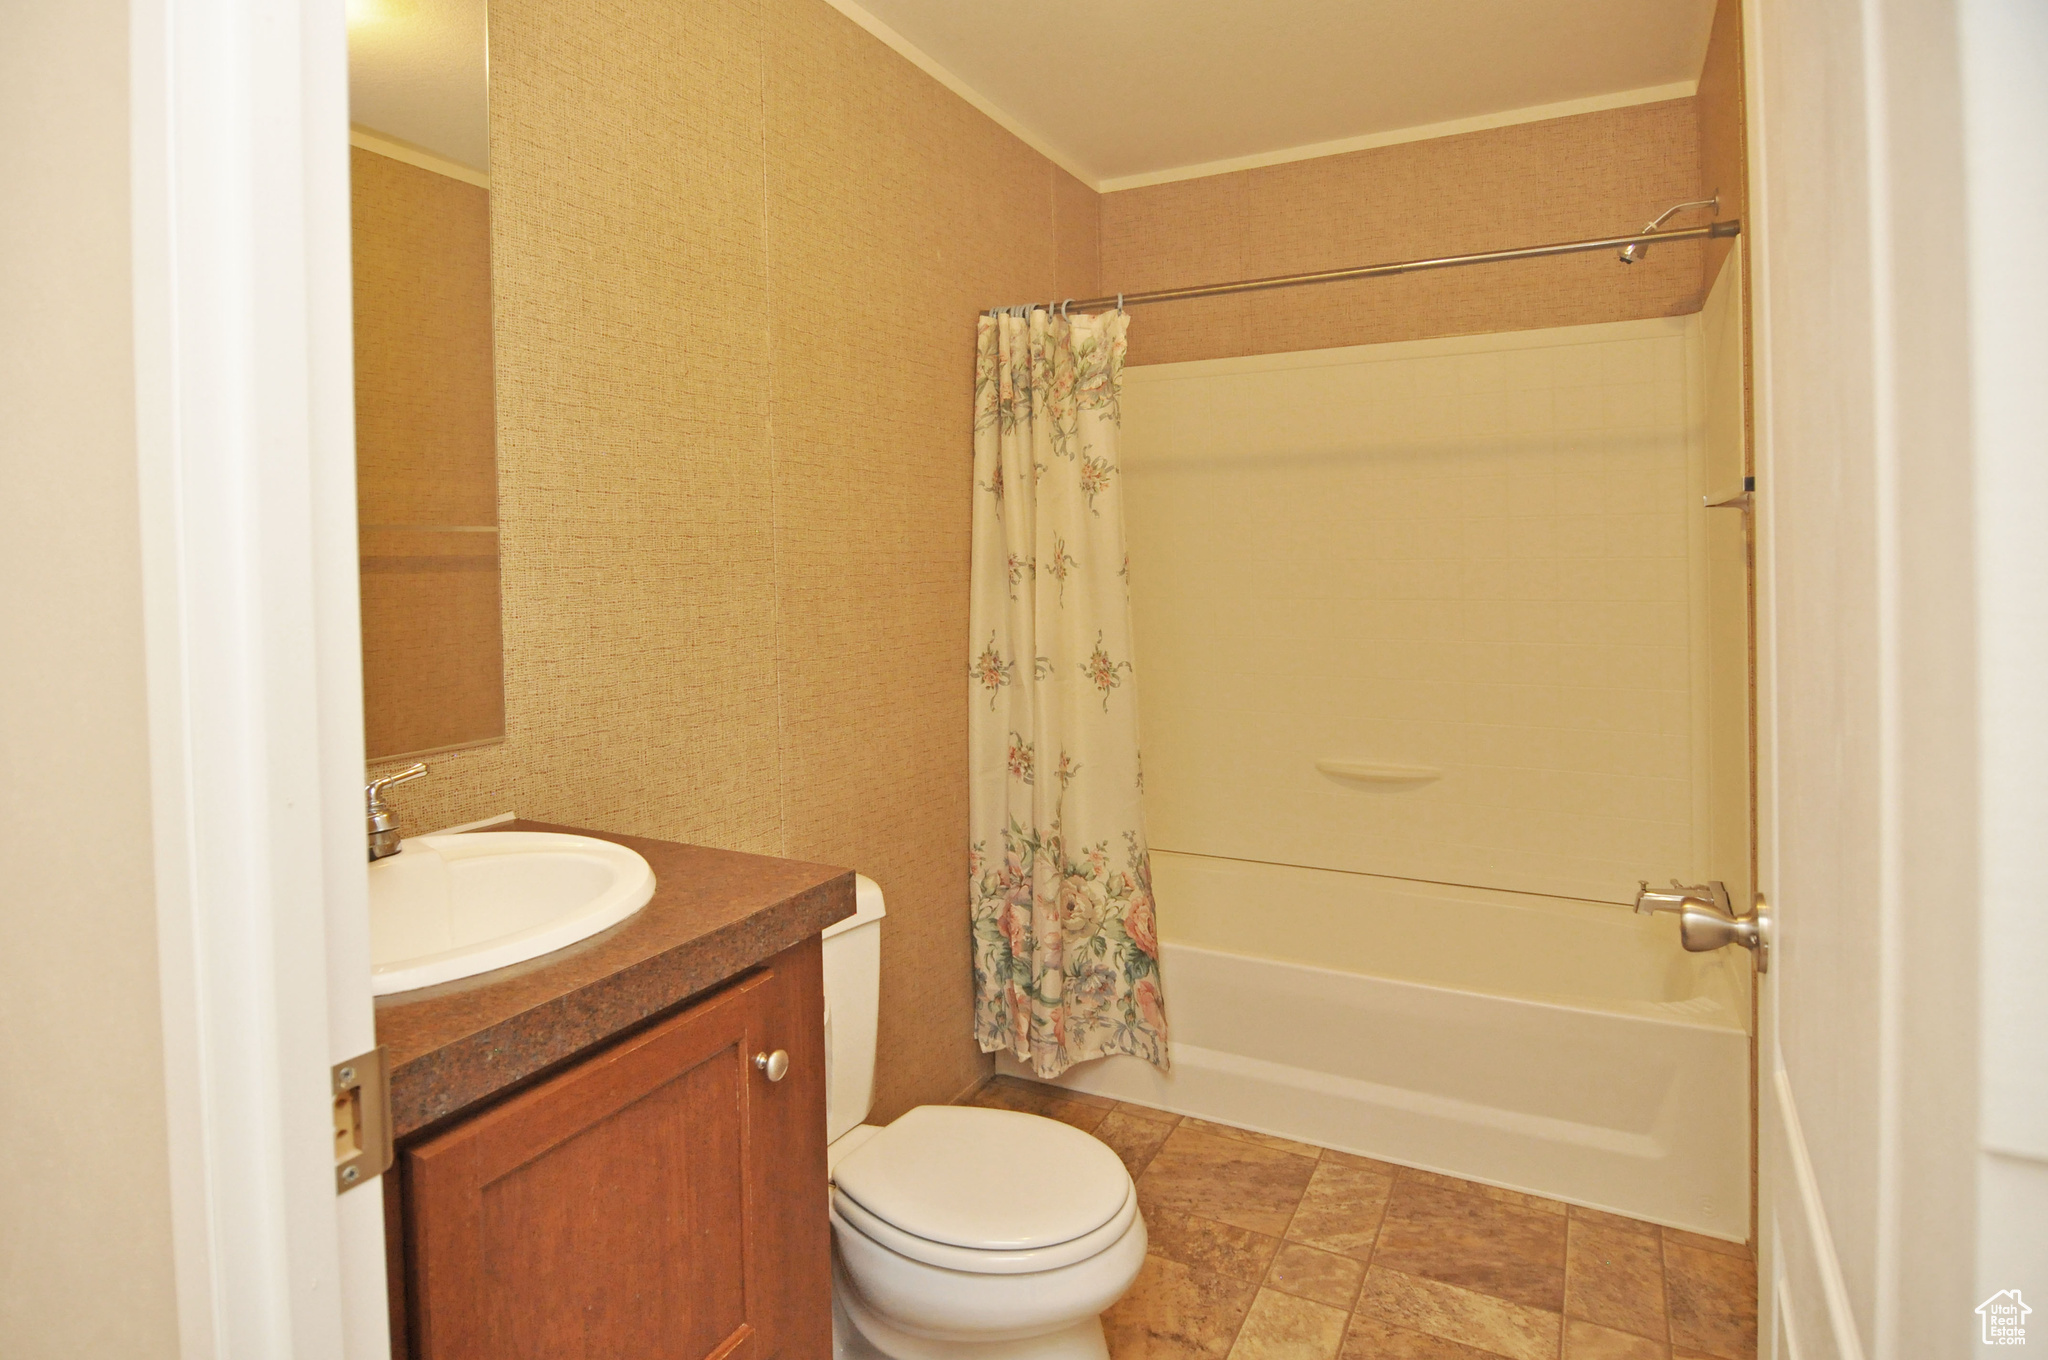 Full bathroom featuring tile flooring, shower / tub combo, crown molding, toilet, and vanity